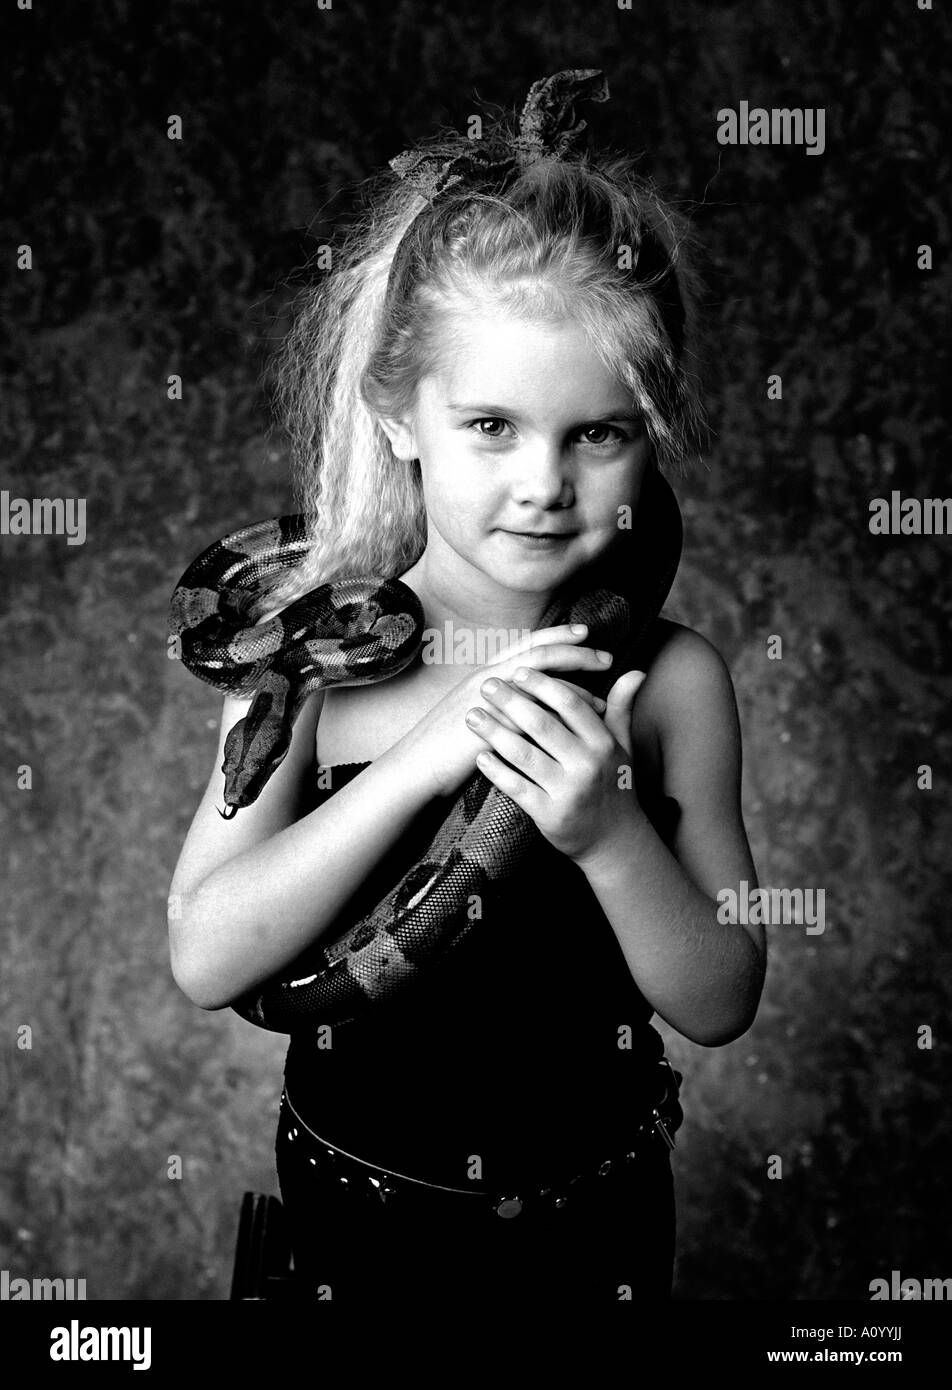 Little girl about five years oldwith long blond hair and mischievous smile holding pet snake. B/W. Stock Photo